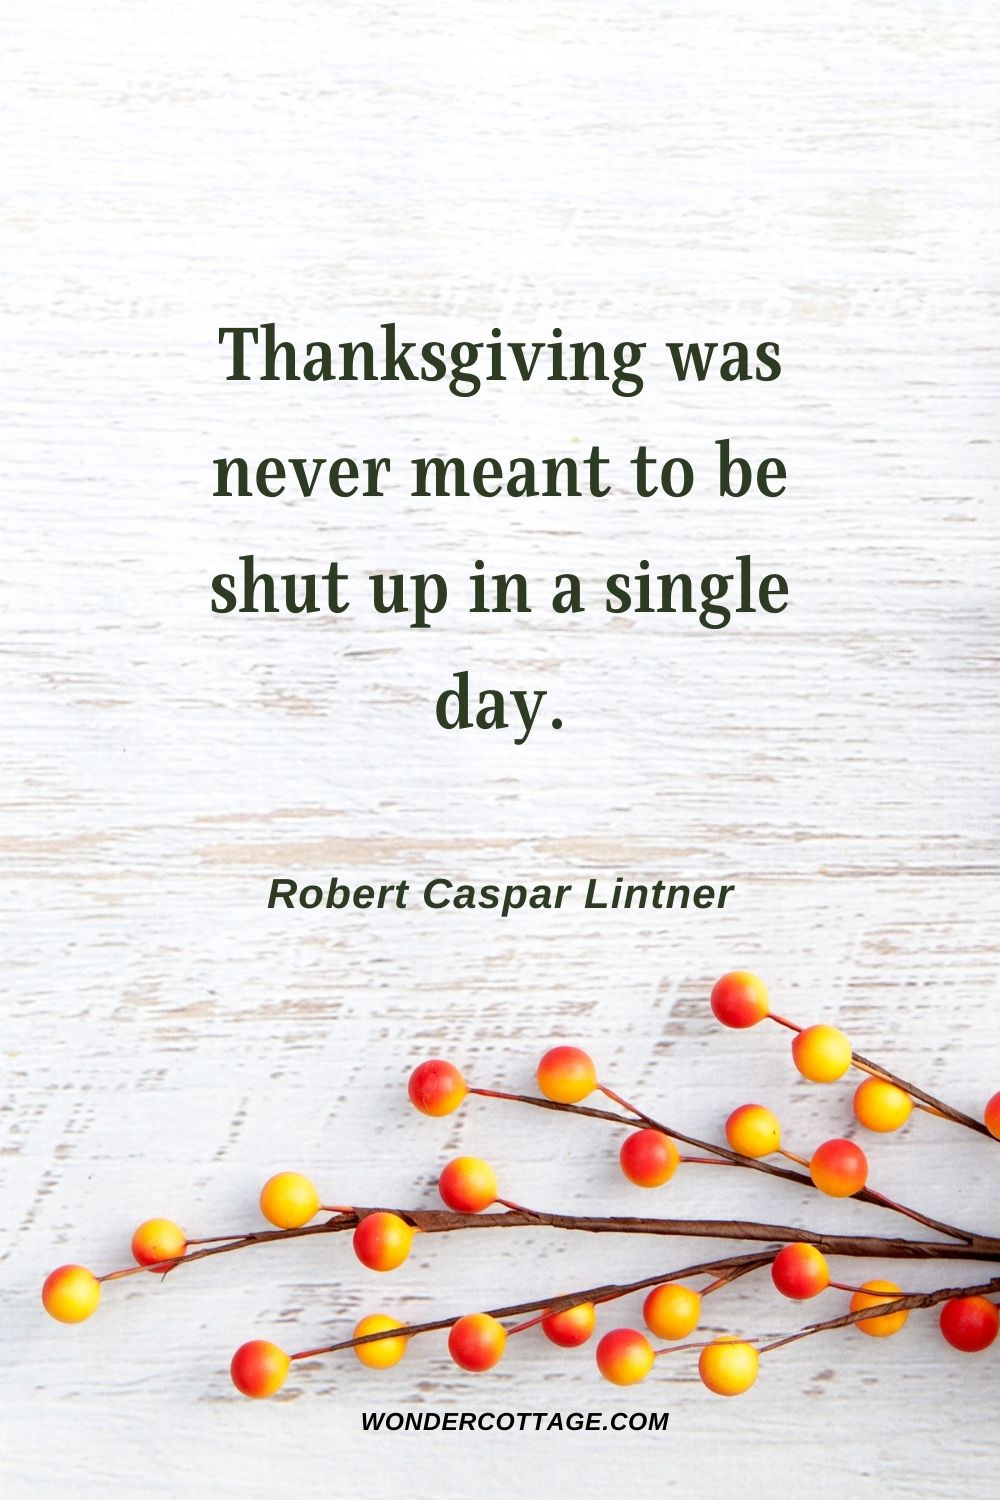 Thanksgiving was never meant to be shut up in a single day. Robert Caspar Lintner - Thanksgiving Quotes With Images